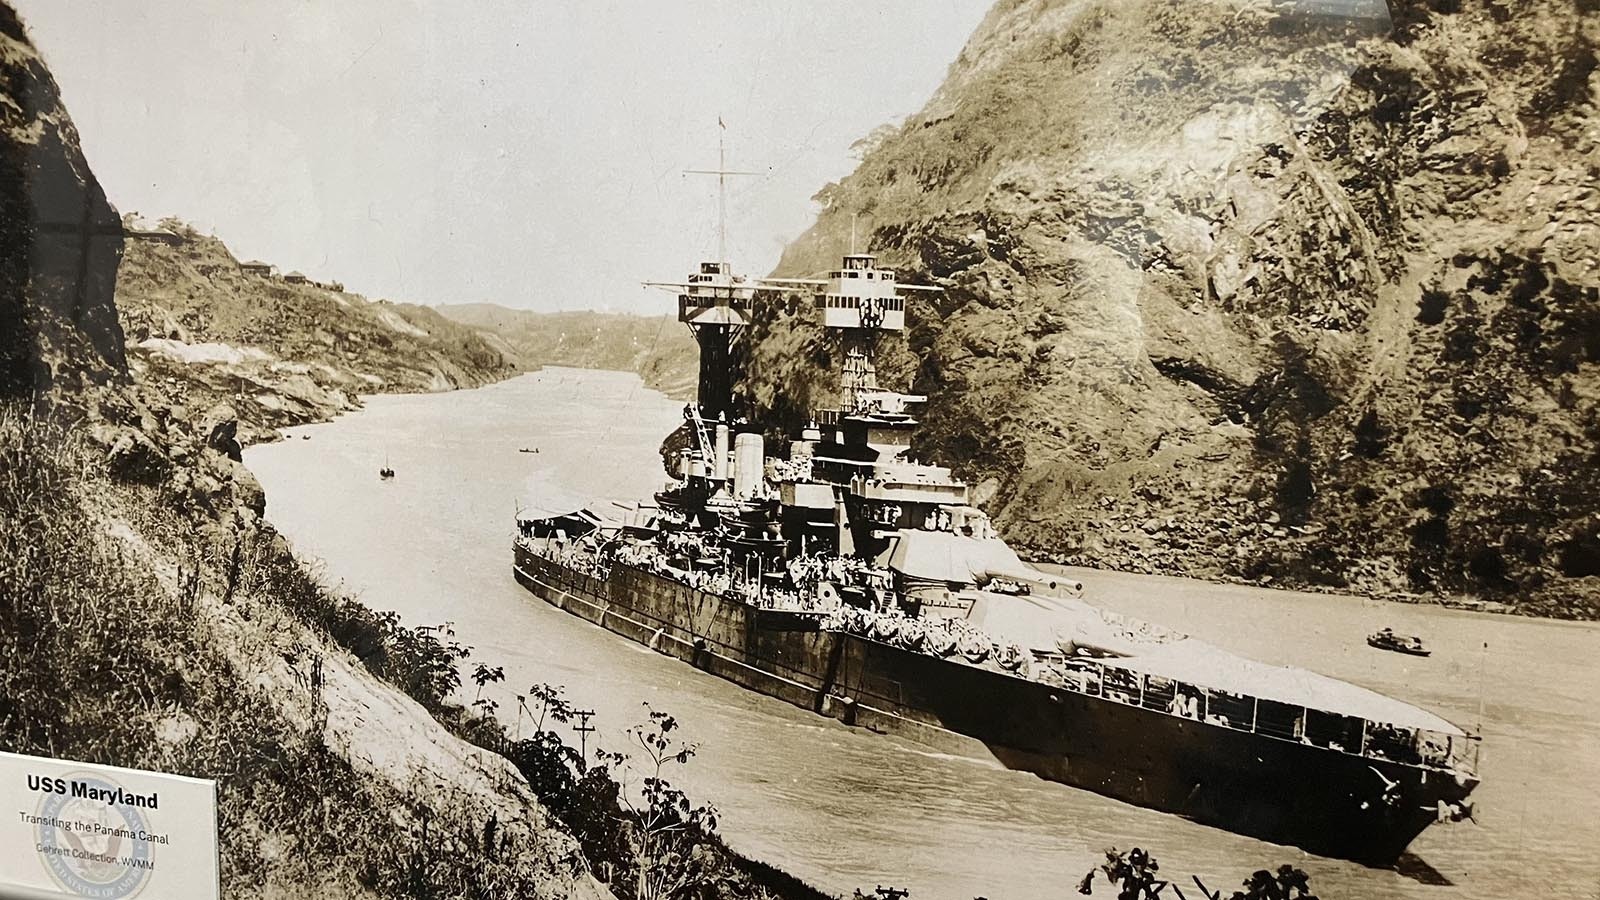 Clarence Gherett’s photo of the USS Maryland making its way through the Panama Canal.